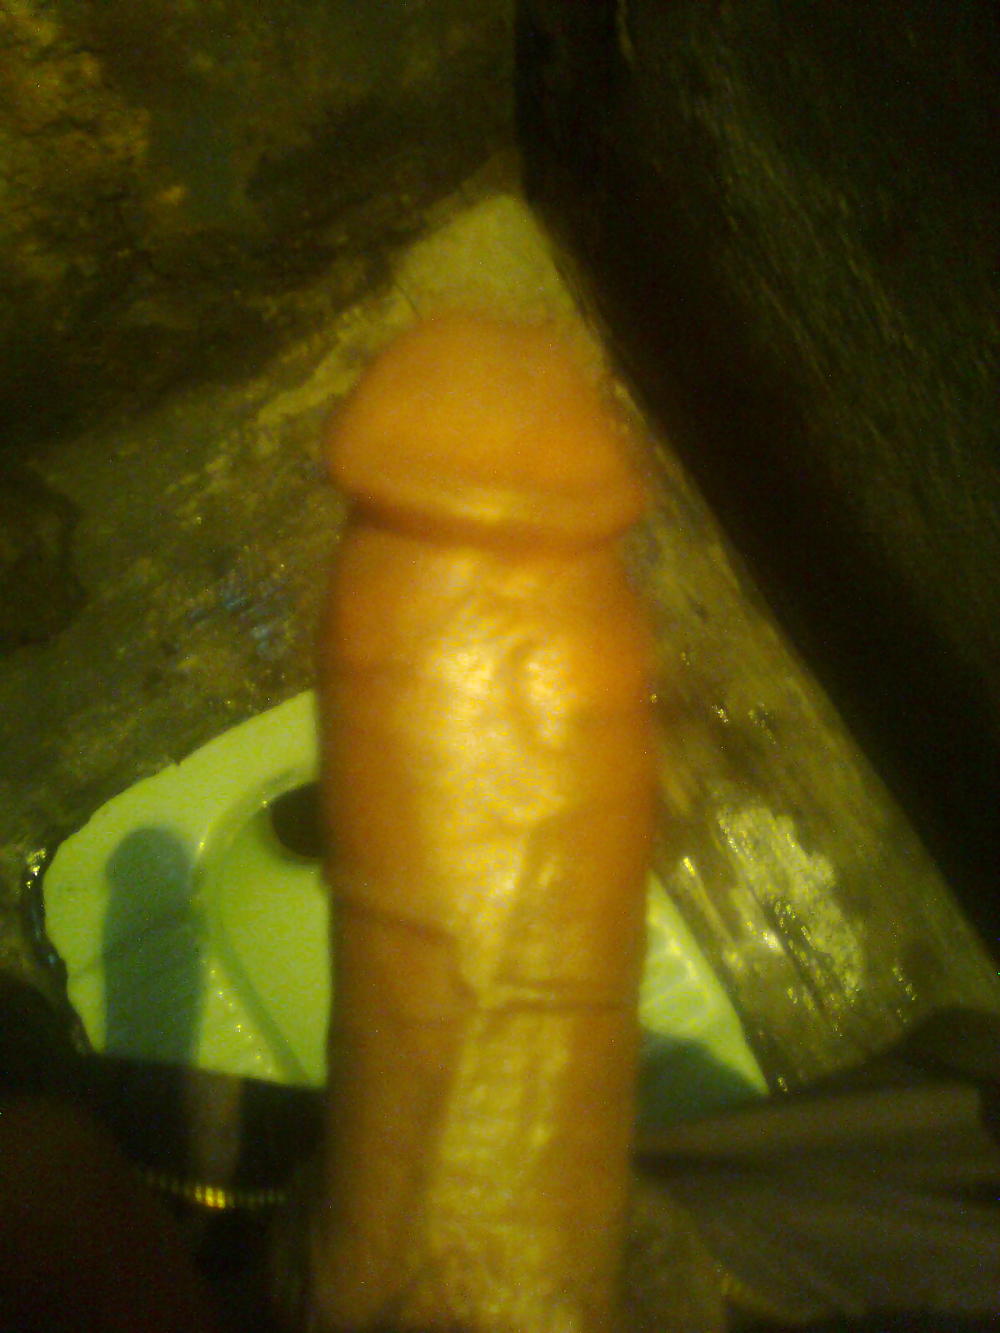 My 8.5 inch indian cock